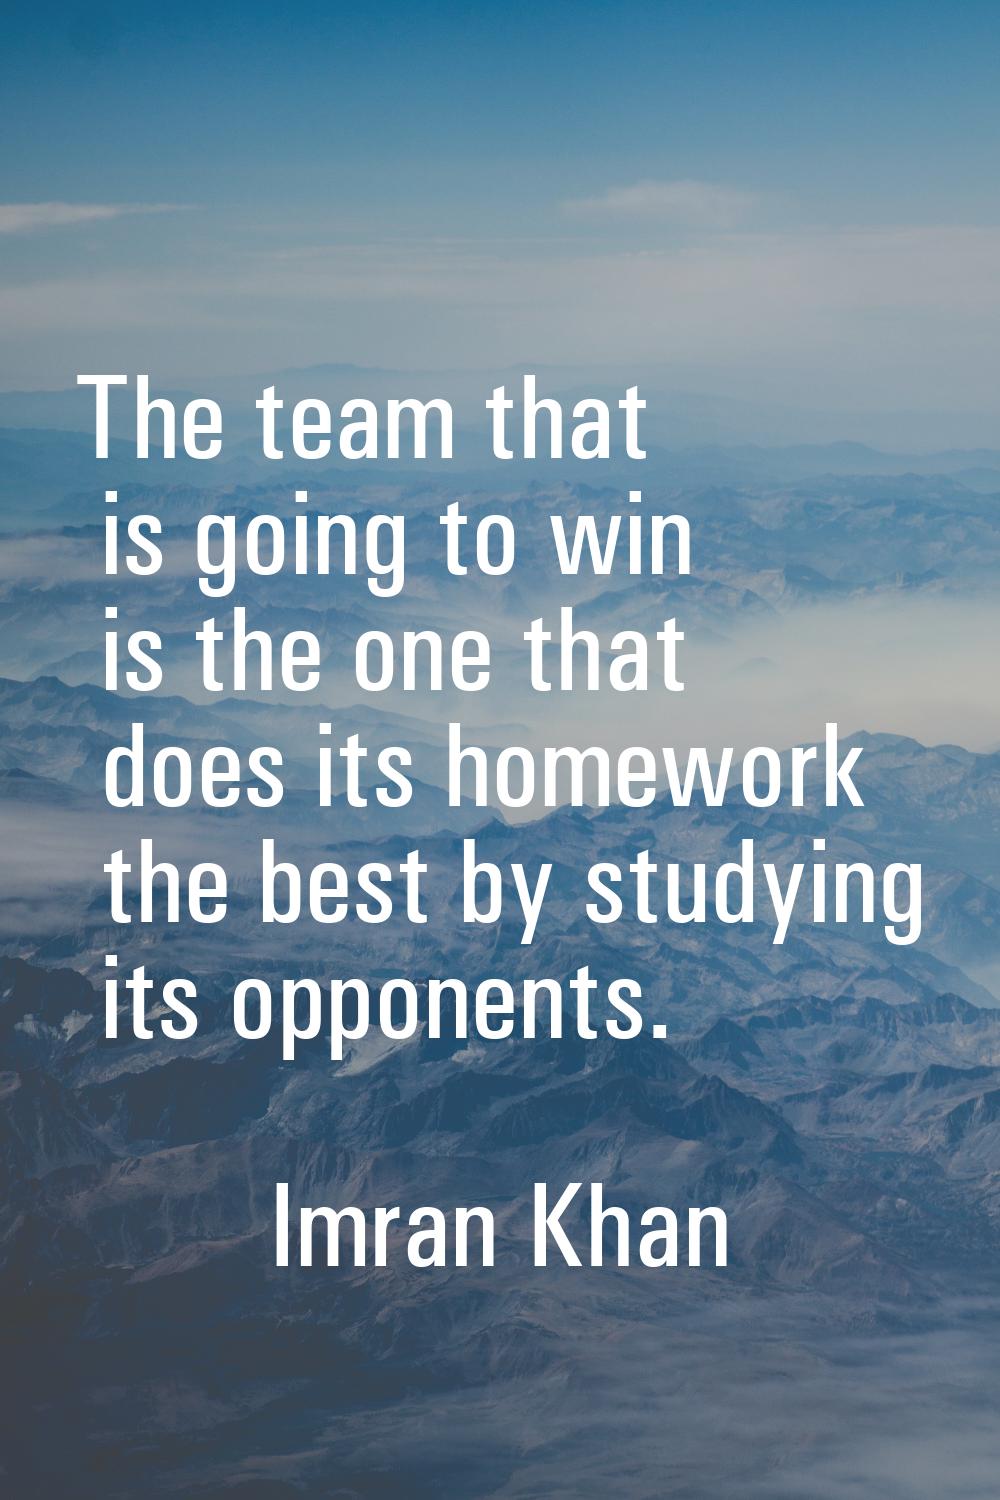 The team that is going to win is the one that does its homework the best by studying its opponents.